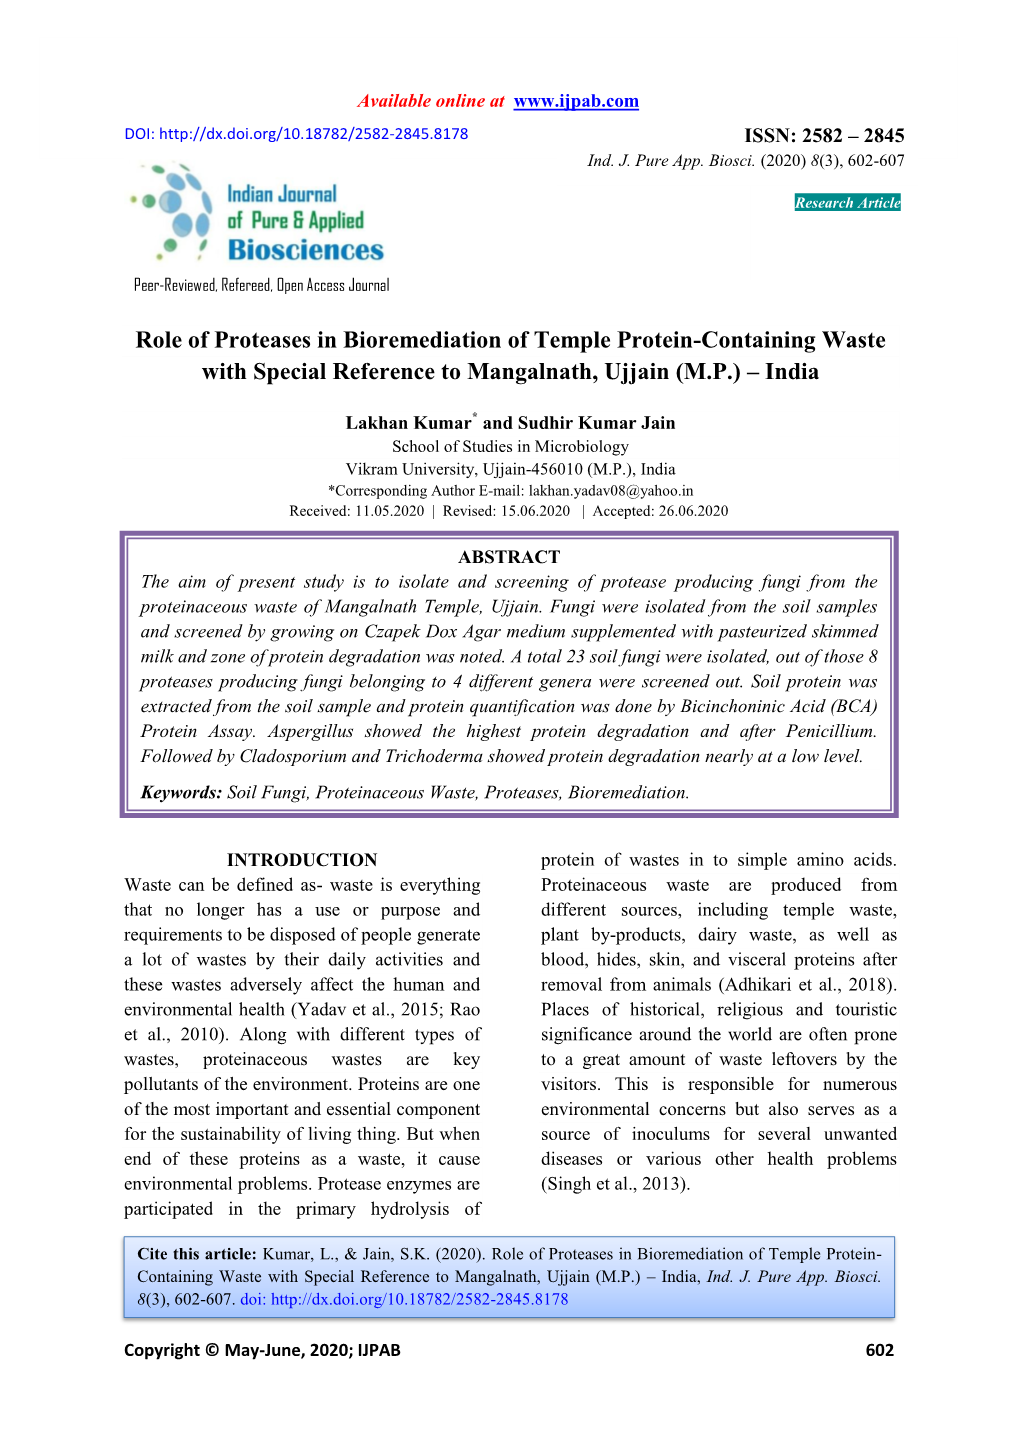 Role of Proteases in Bioremediation of Temple Protein-Containing Waste with Special Reference to Mangalnath, Ujjain (M.P.) – India